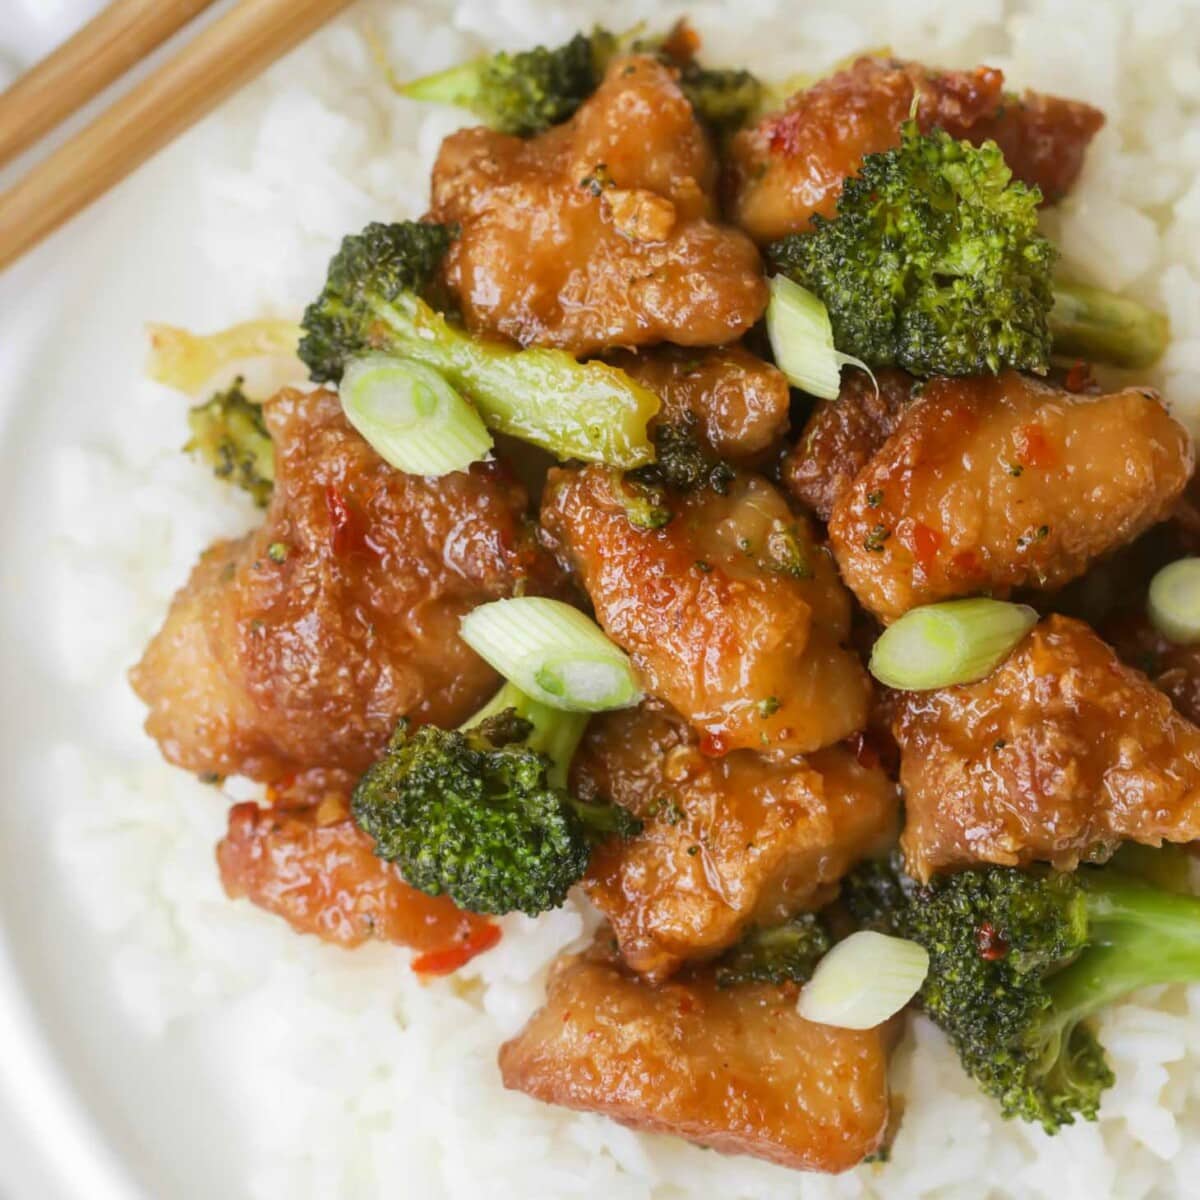 General Tso's chicken with broccoli served over white rice on white plate.